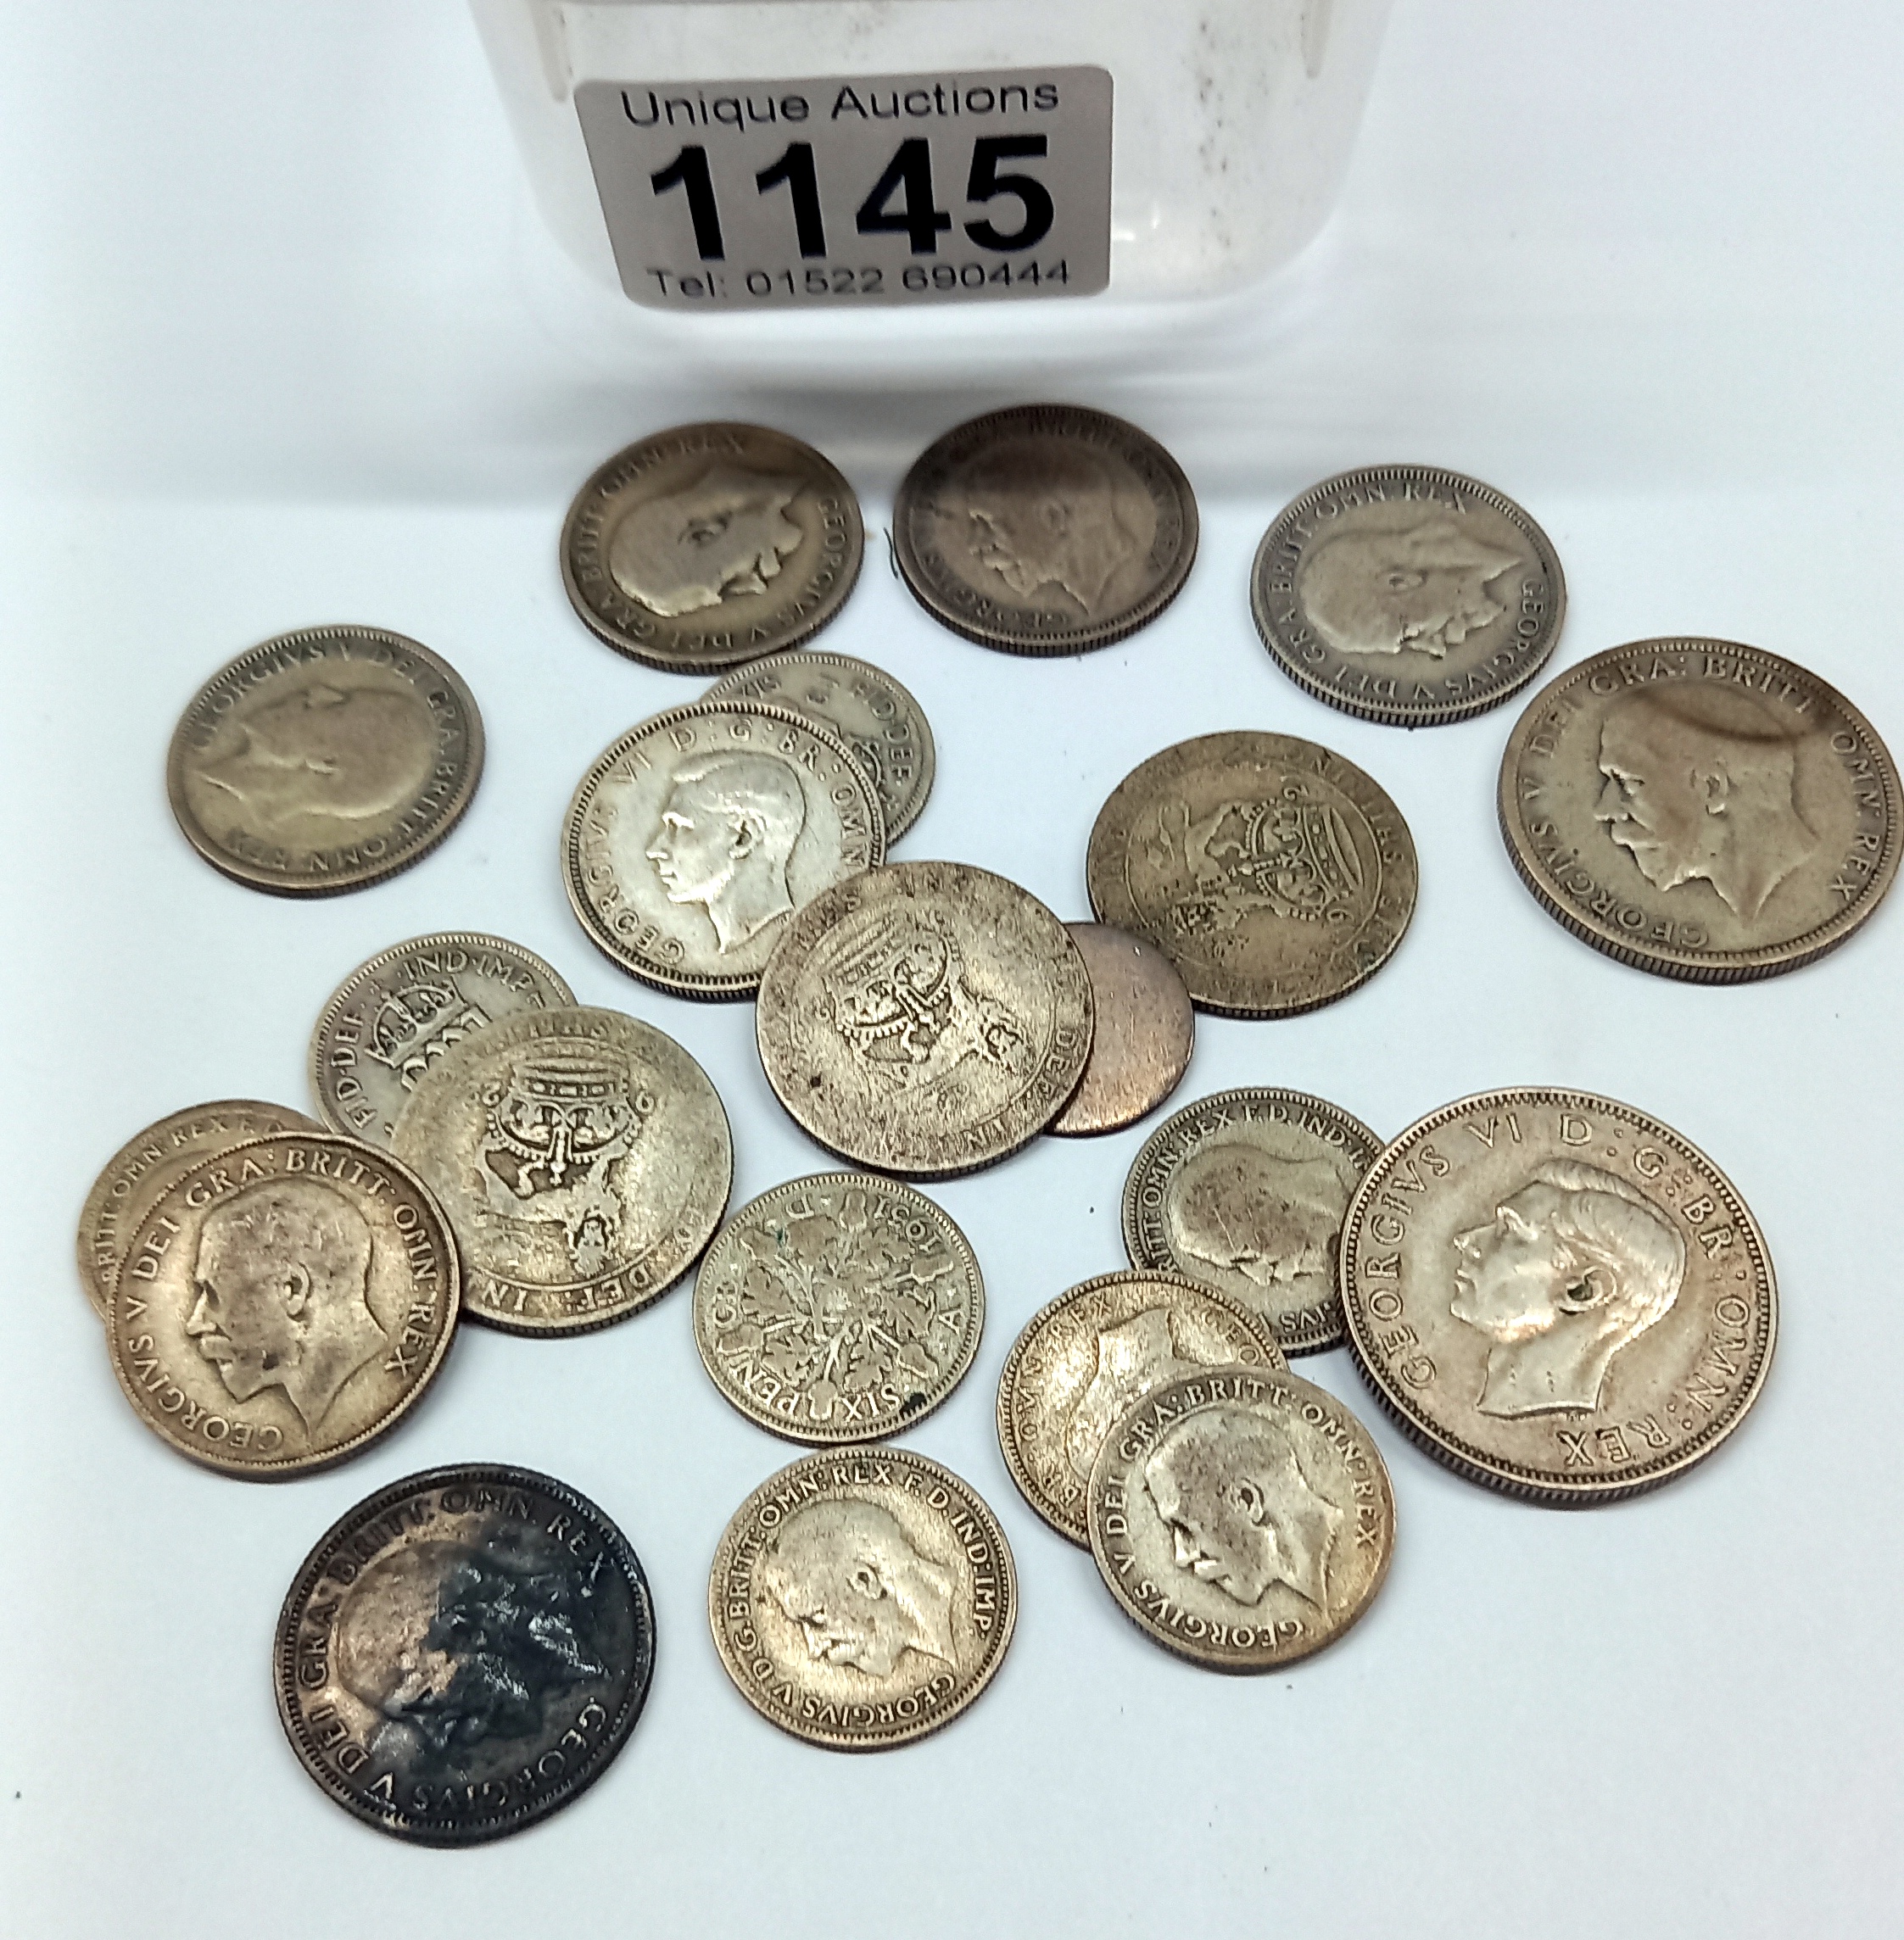 Approximately 3.5 ounces (99 grams) of 1920 - 1946 silver coins,